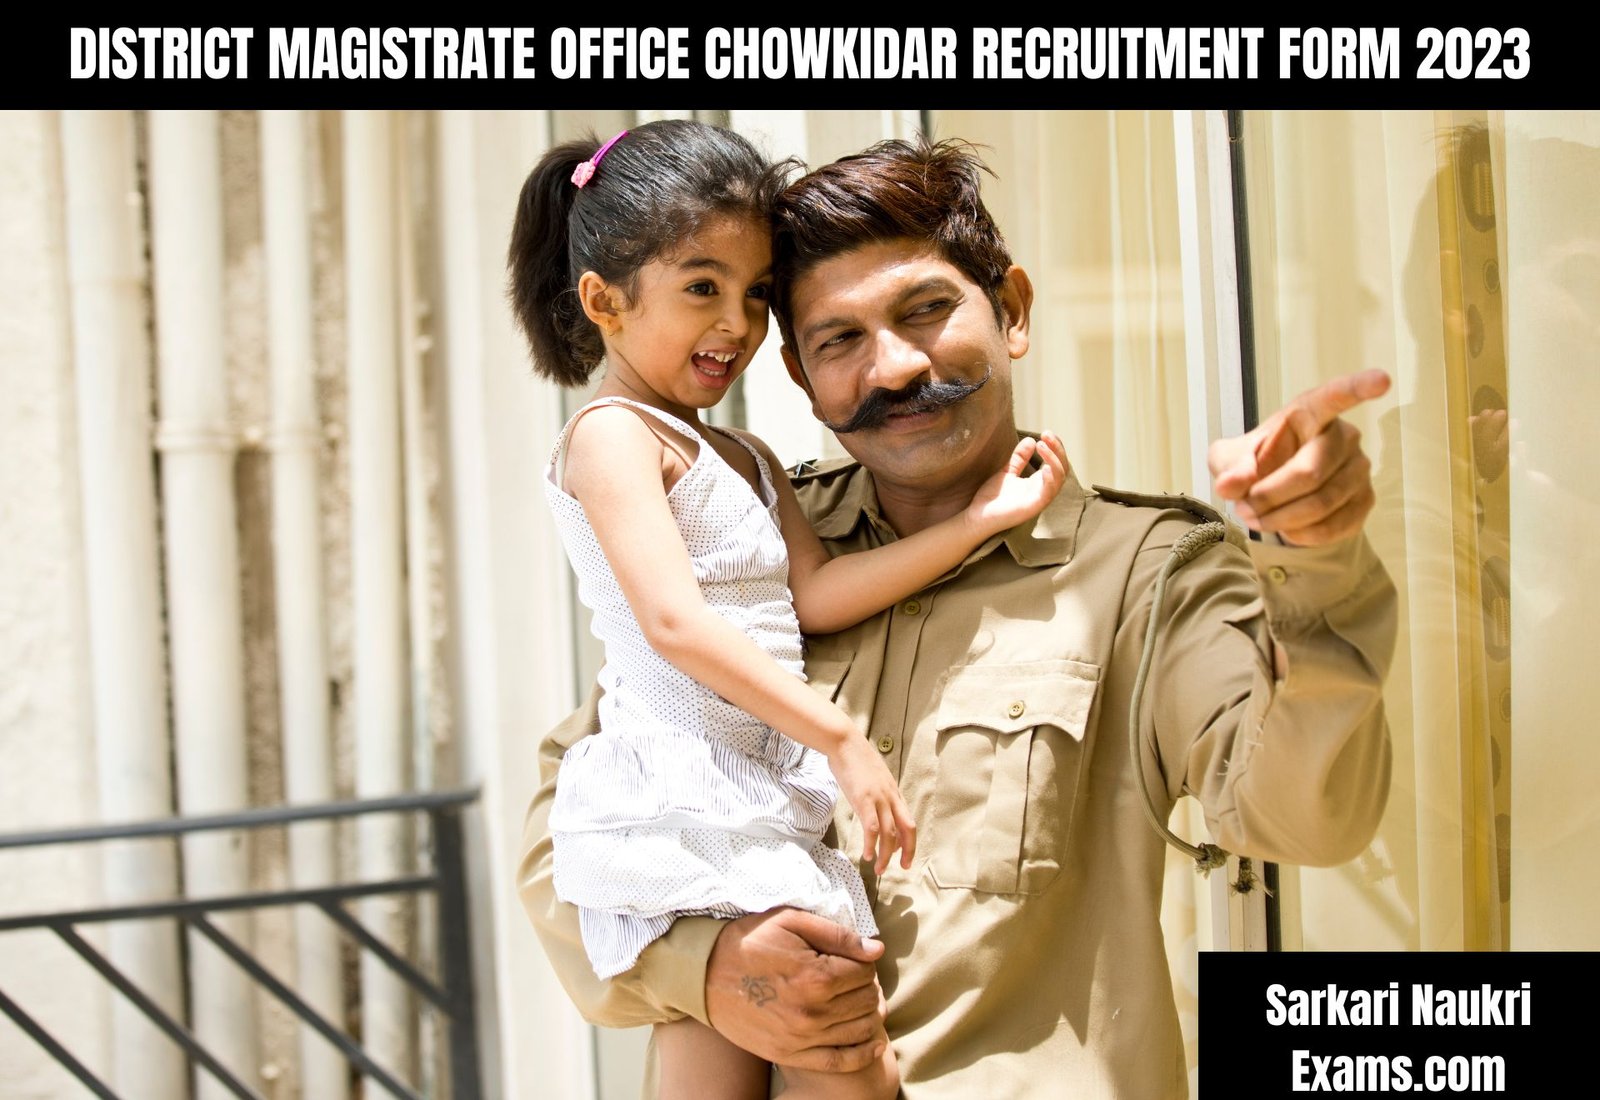 District Magistrate Office Chowkidar Recruitment Form 2023 | Last Date 1 February 